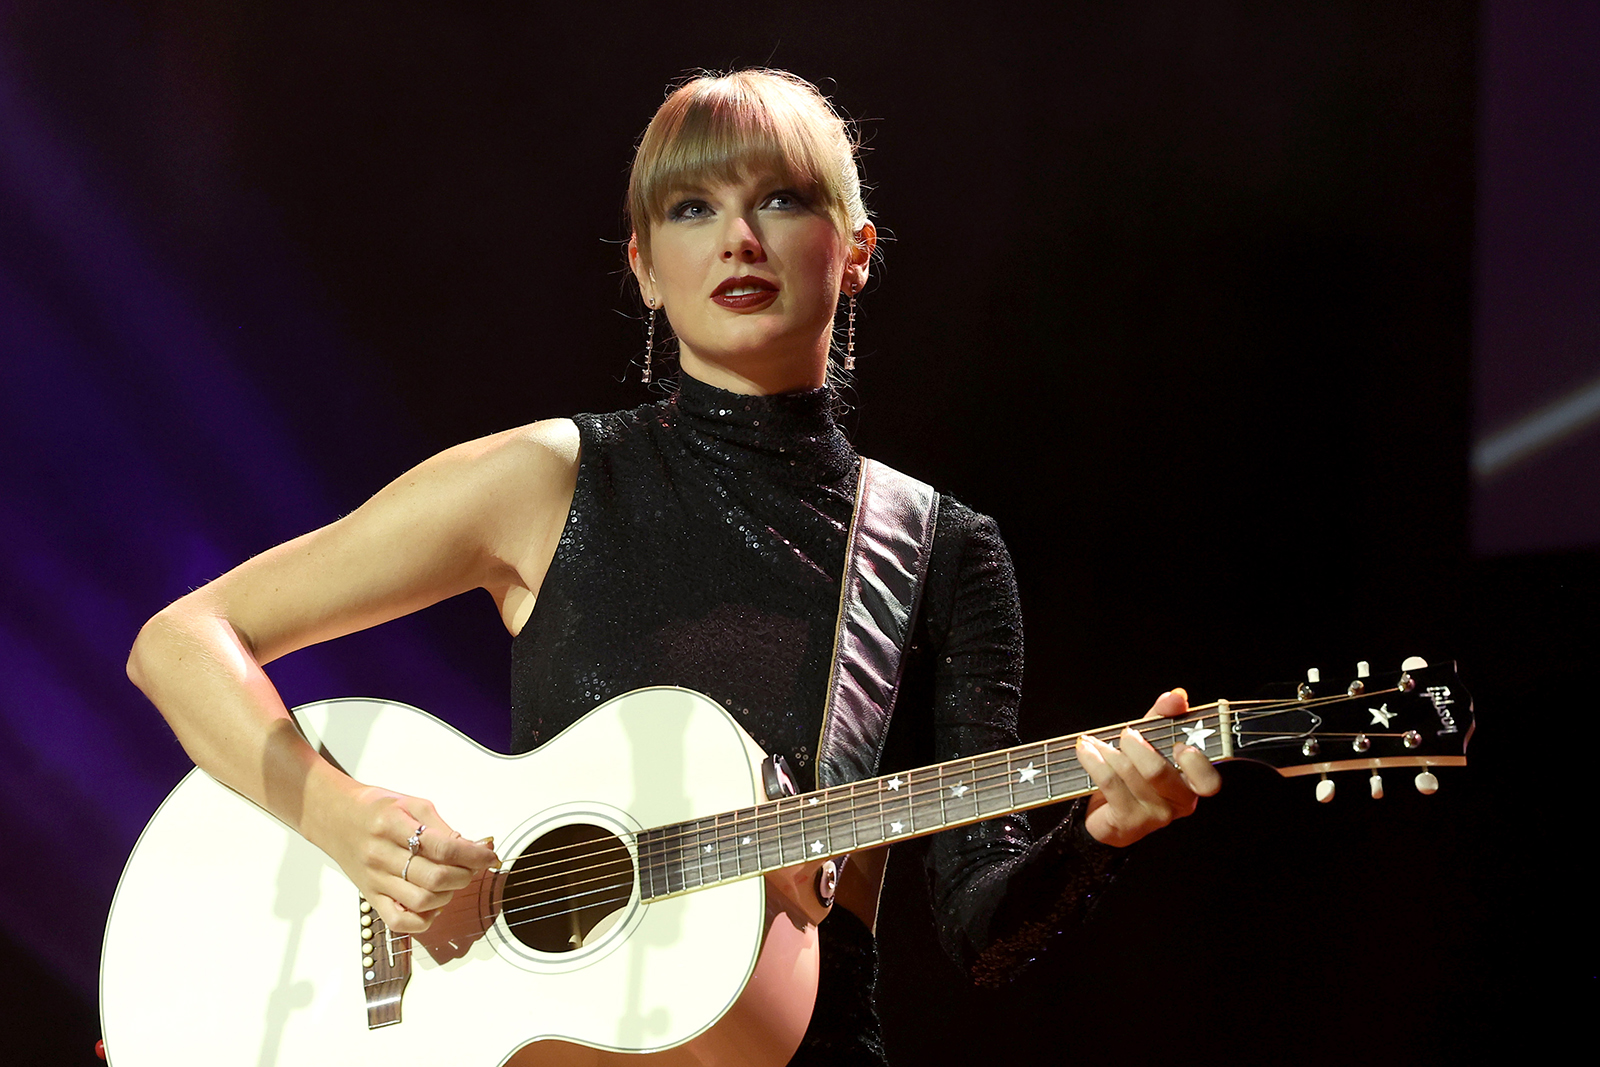 Catch up on what went wrong with Ticketmaster as Taylor Swift fans tried to  get tickets for her Eras tour